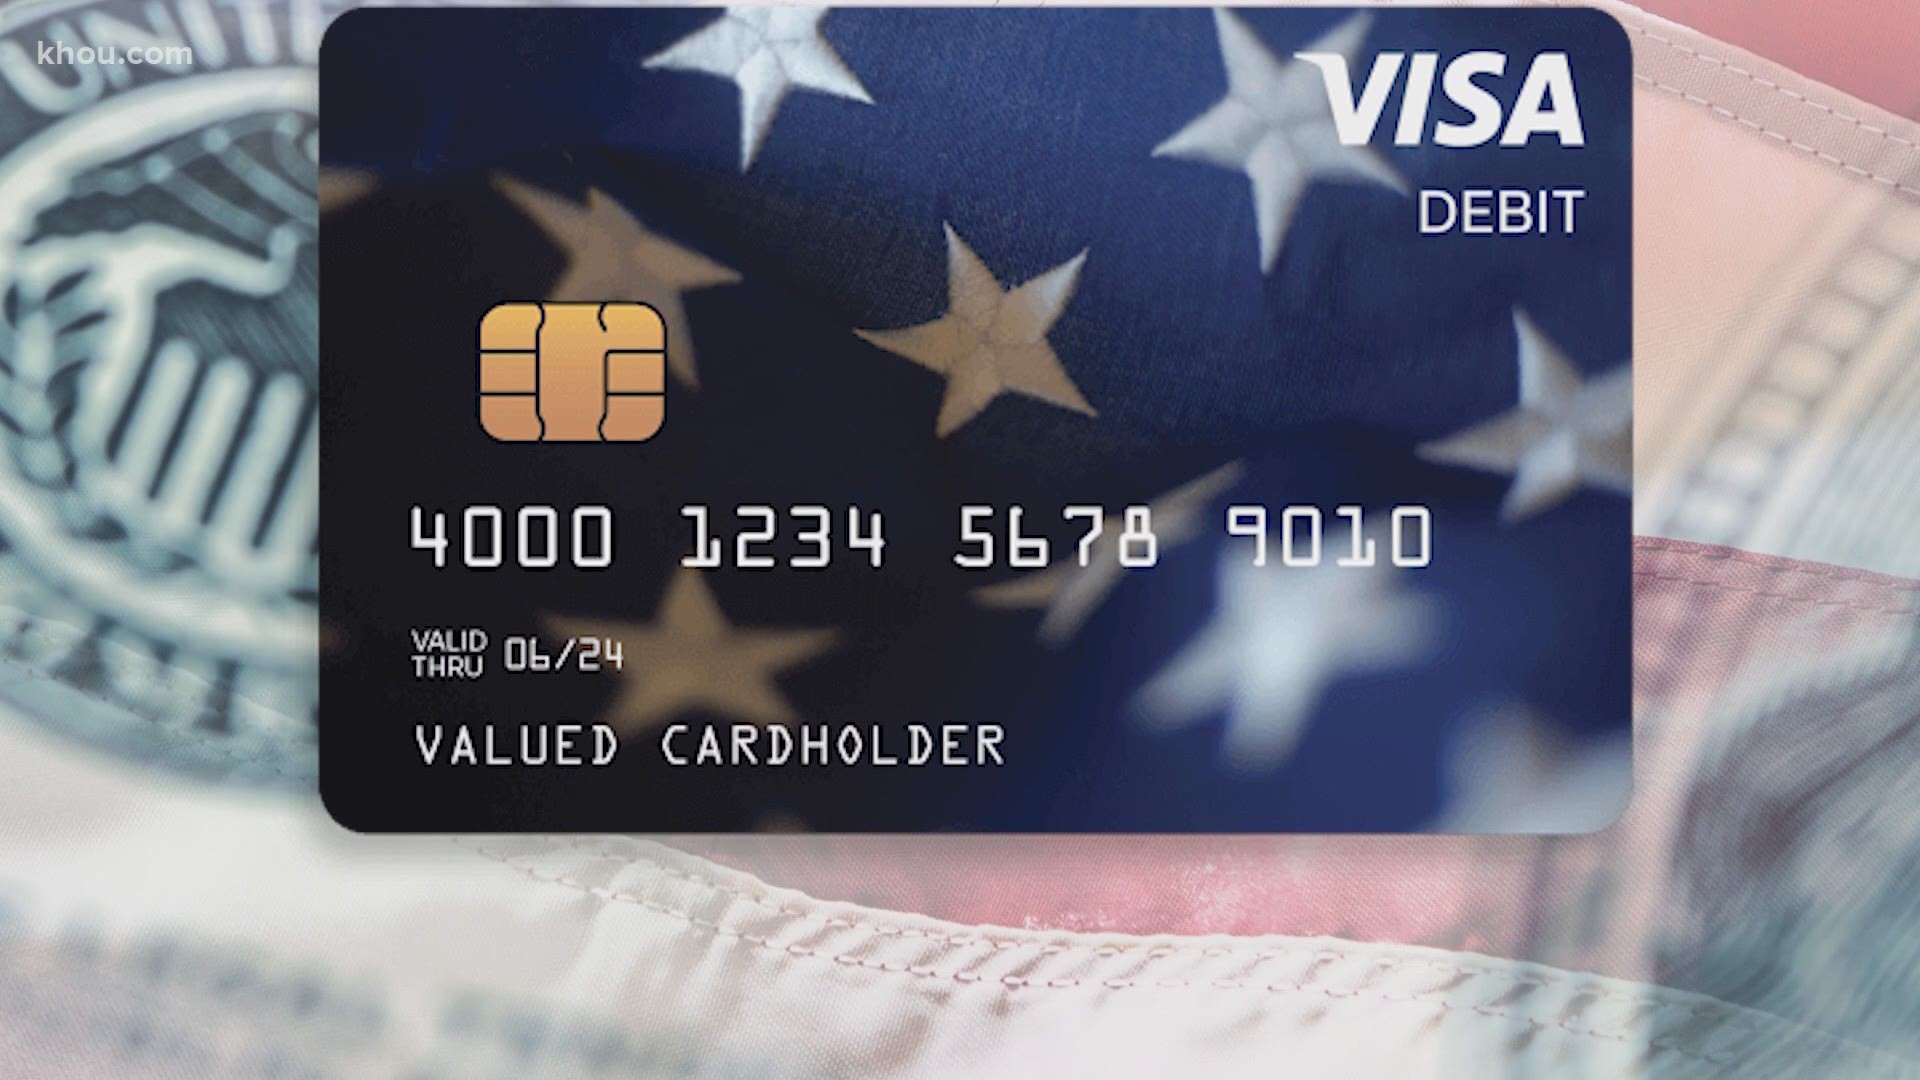 Nearly 4 million stimulus debit cards are being mailed this week.